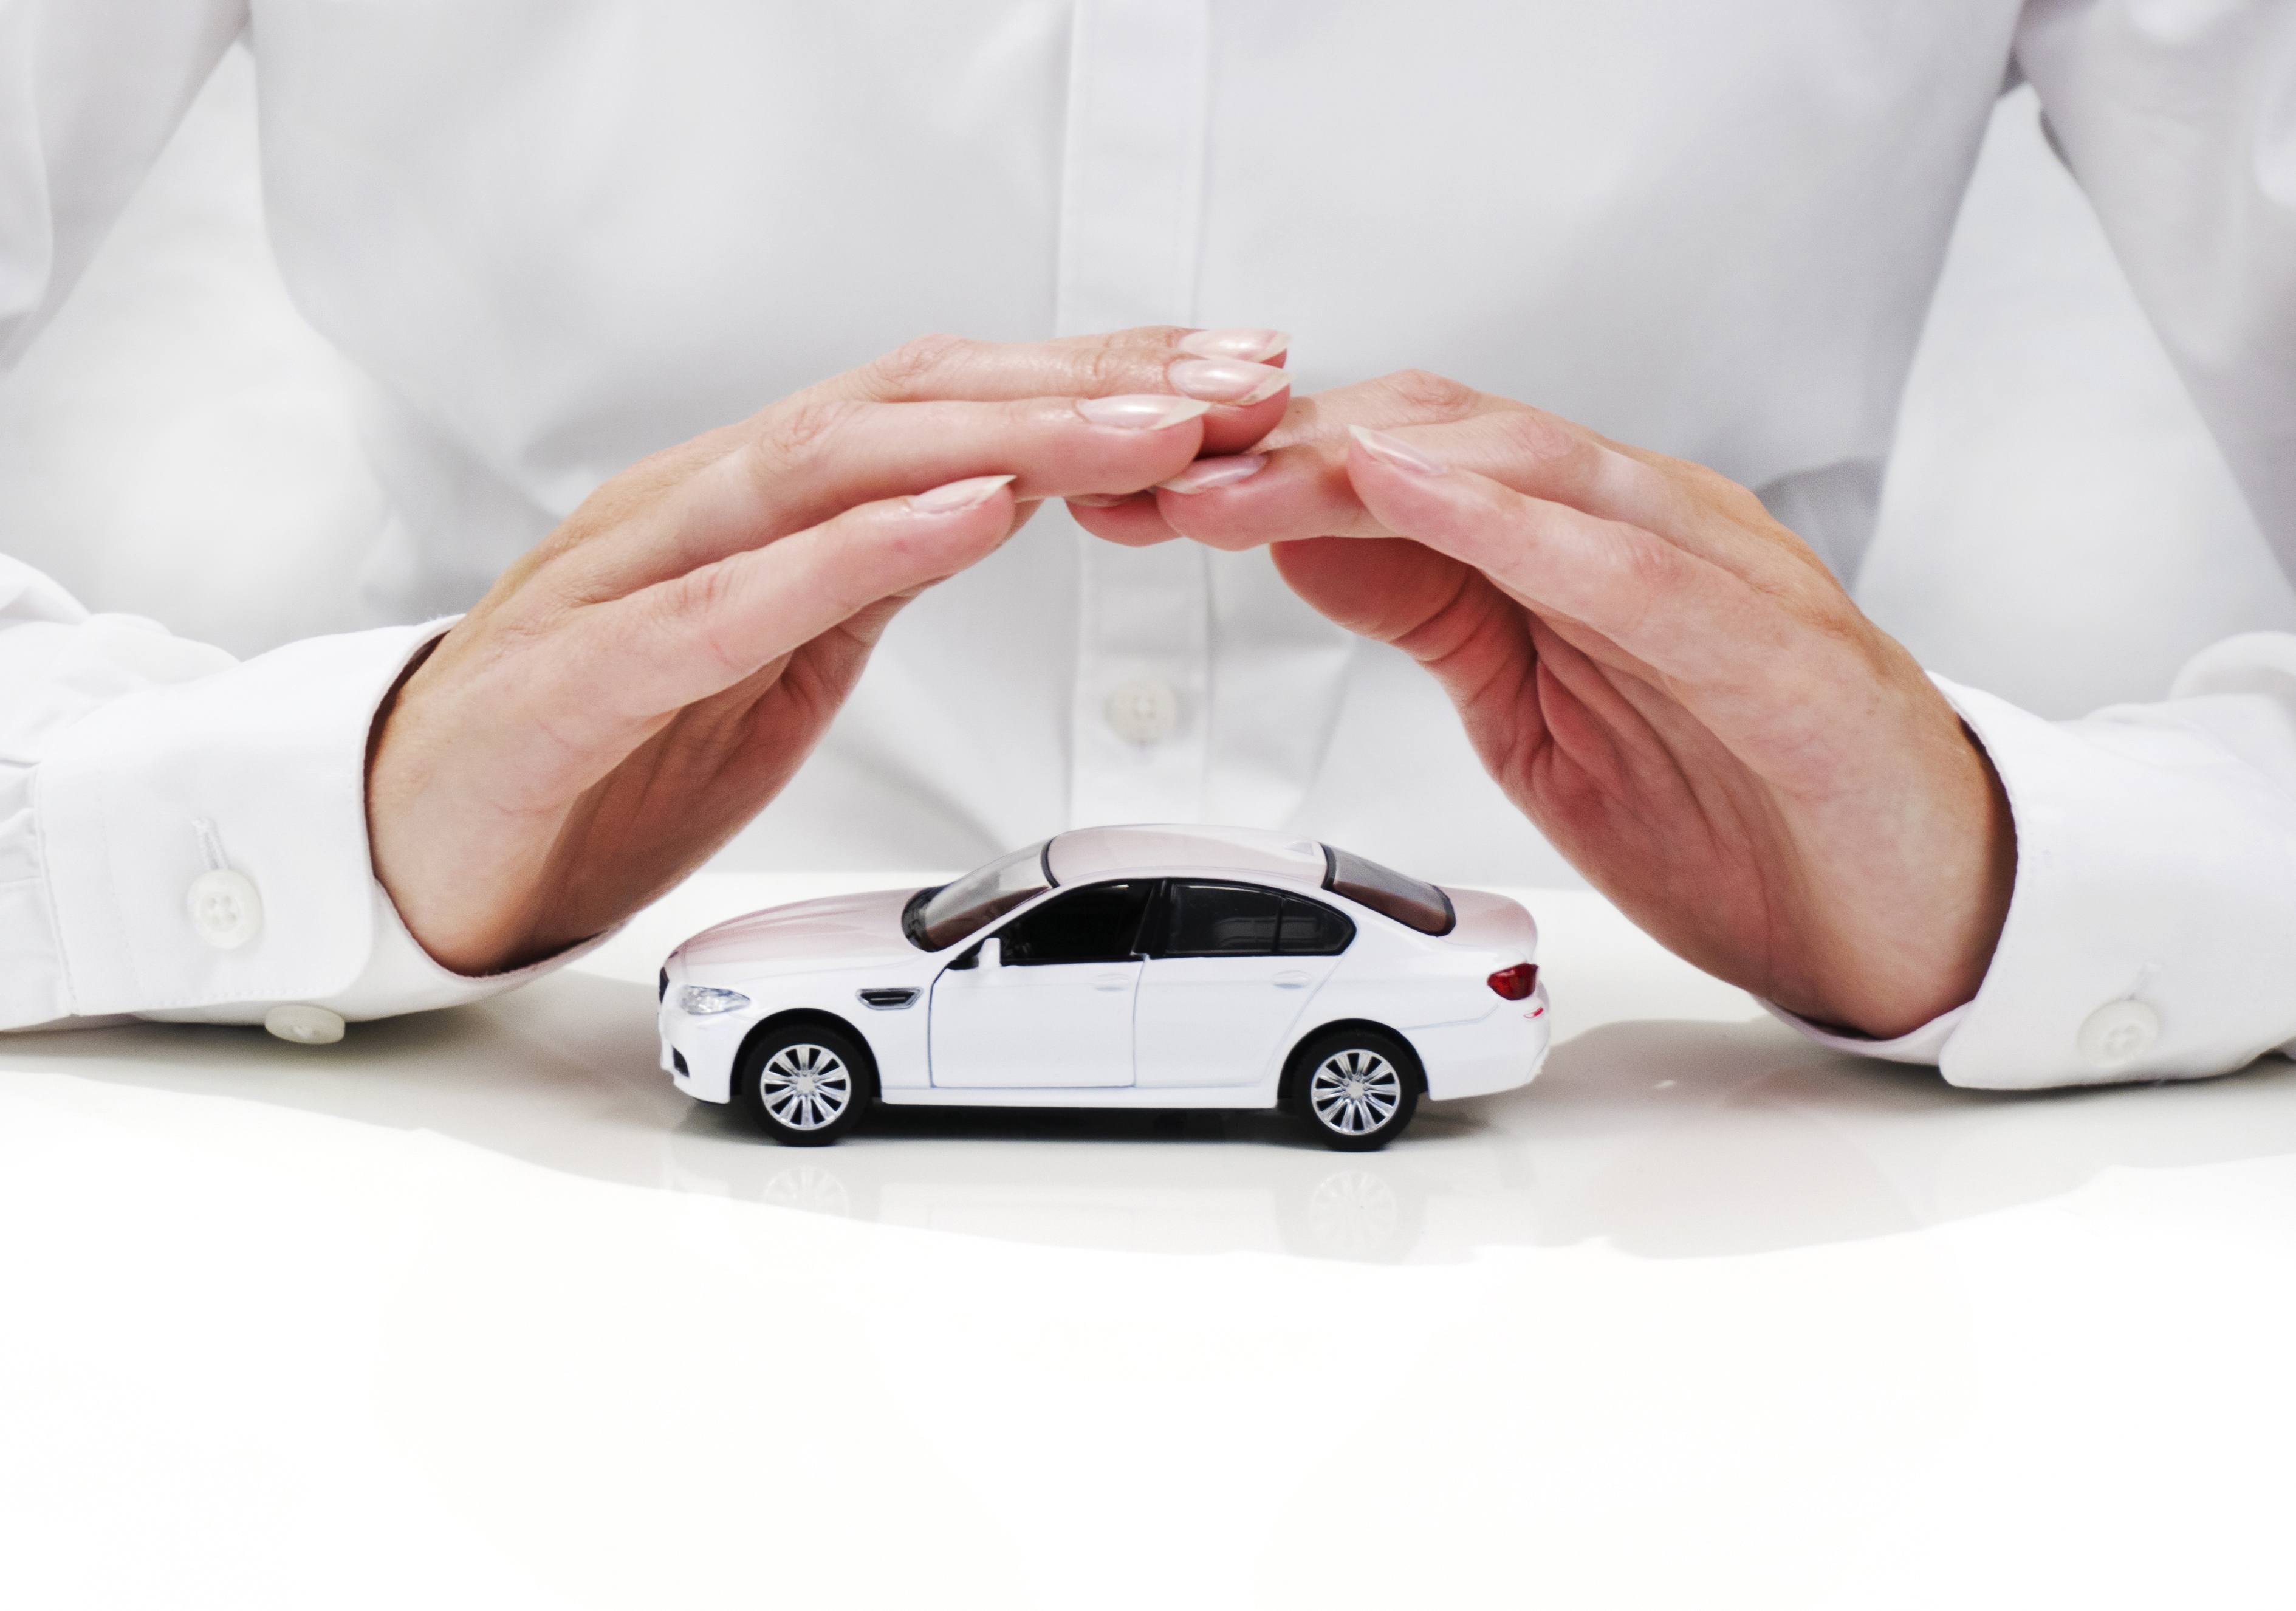 10 Things You Should Consider Before Buying Auto Insurance